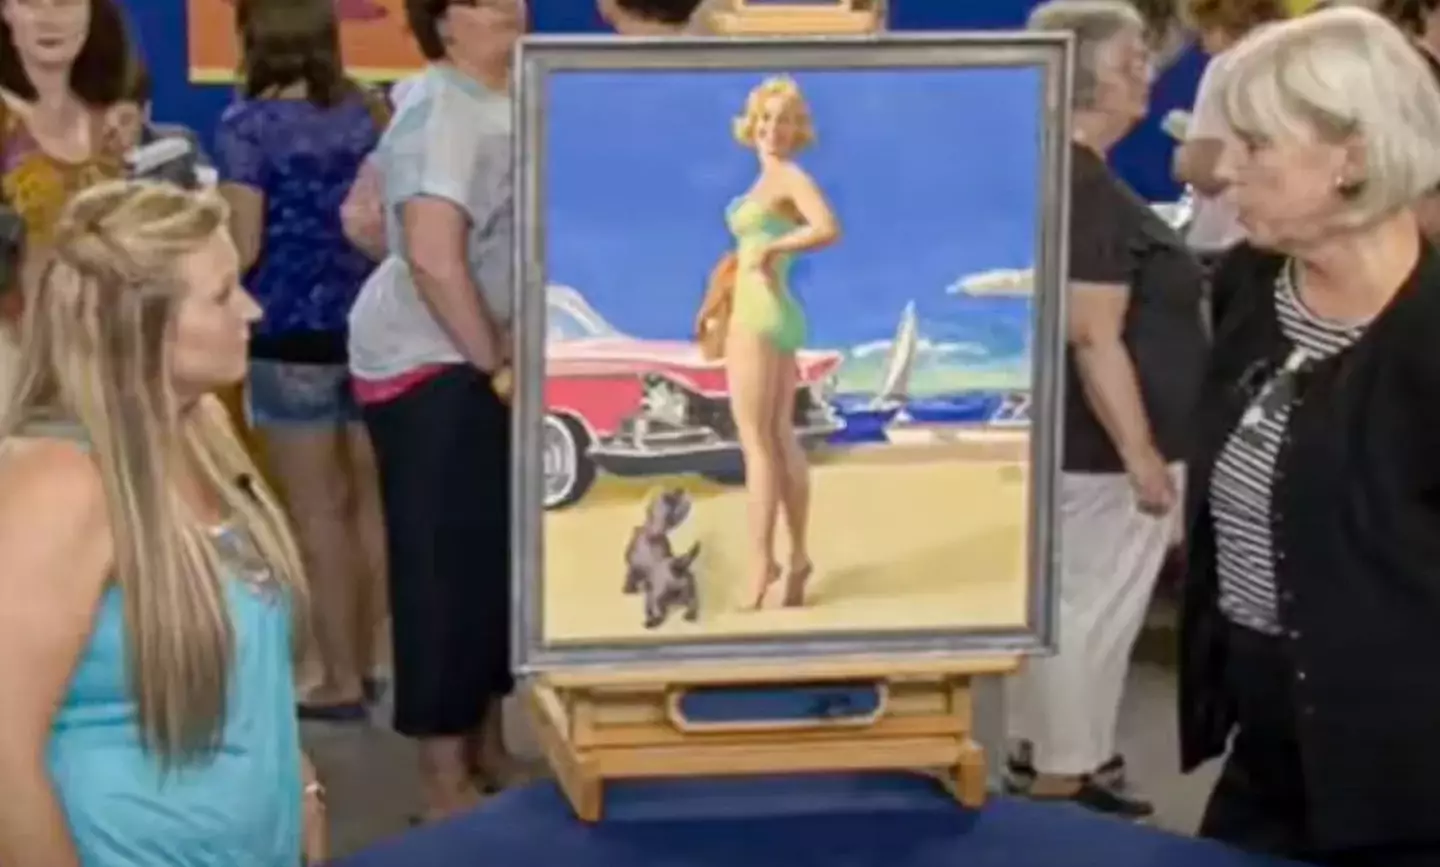 The woman explained her mother had given her the painting.